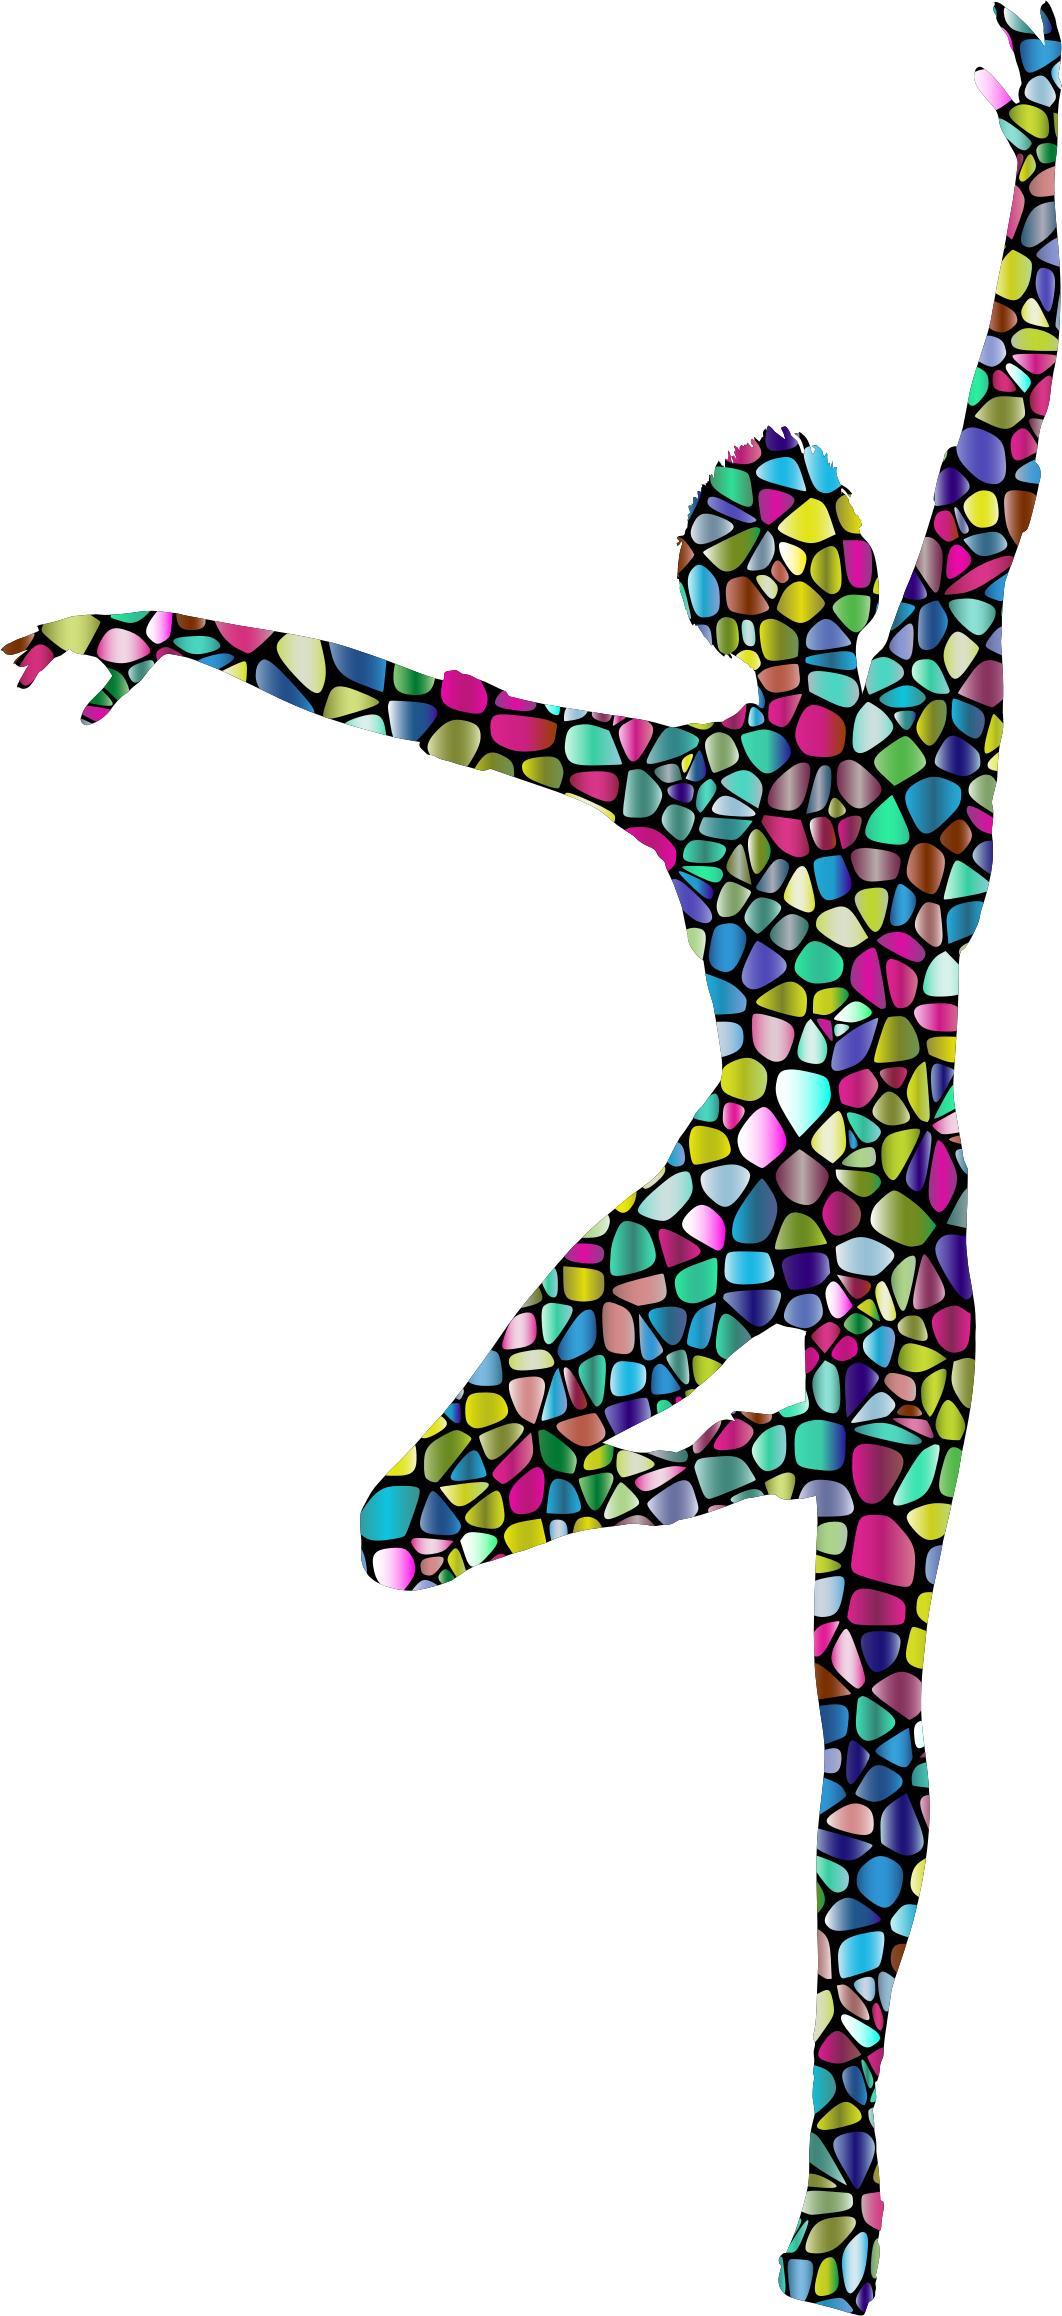 Polyprismatic Tiled Dancing Woman Silhouette With Background png transparent